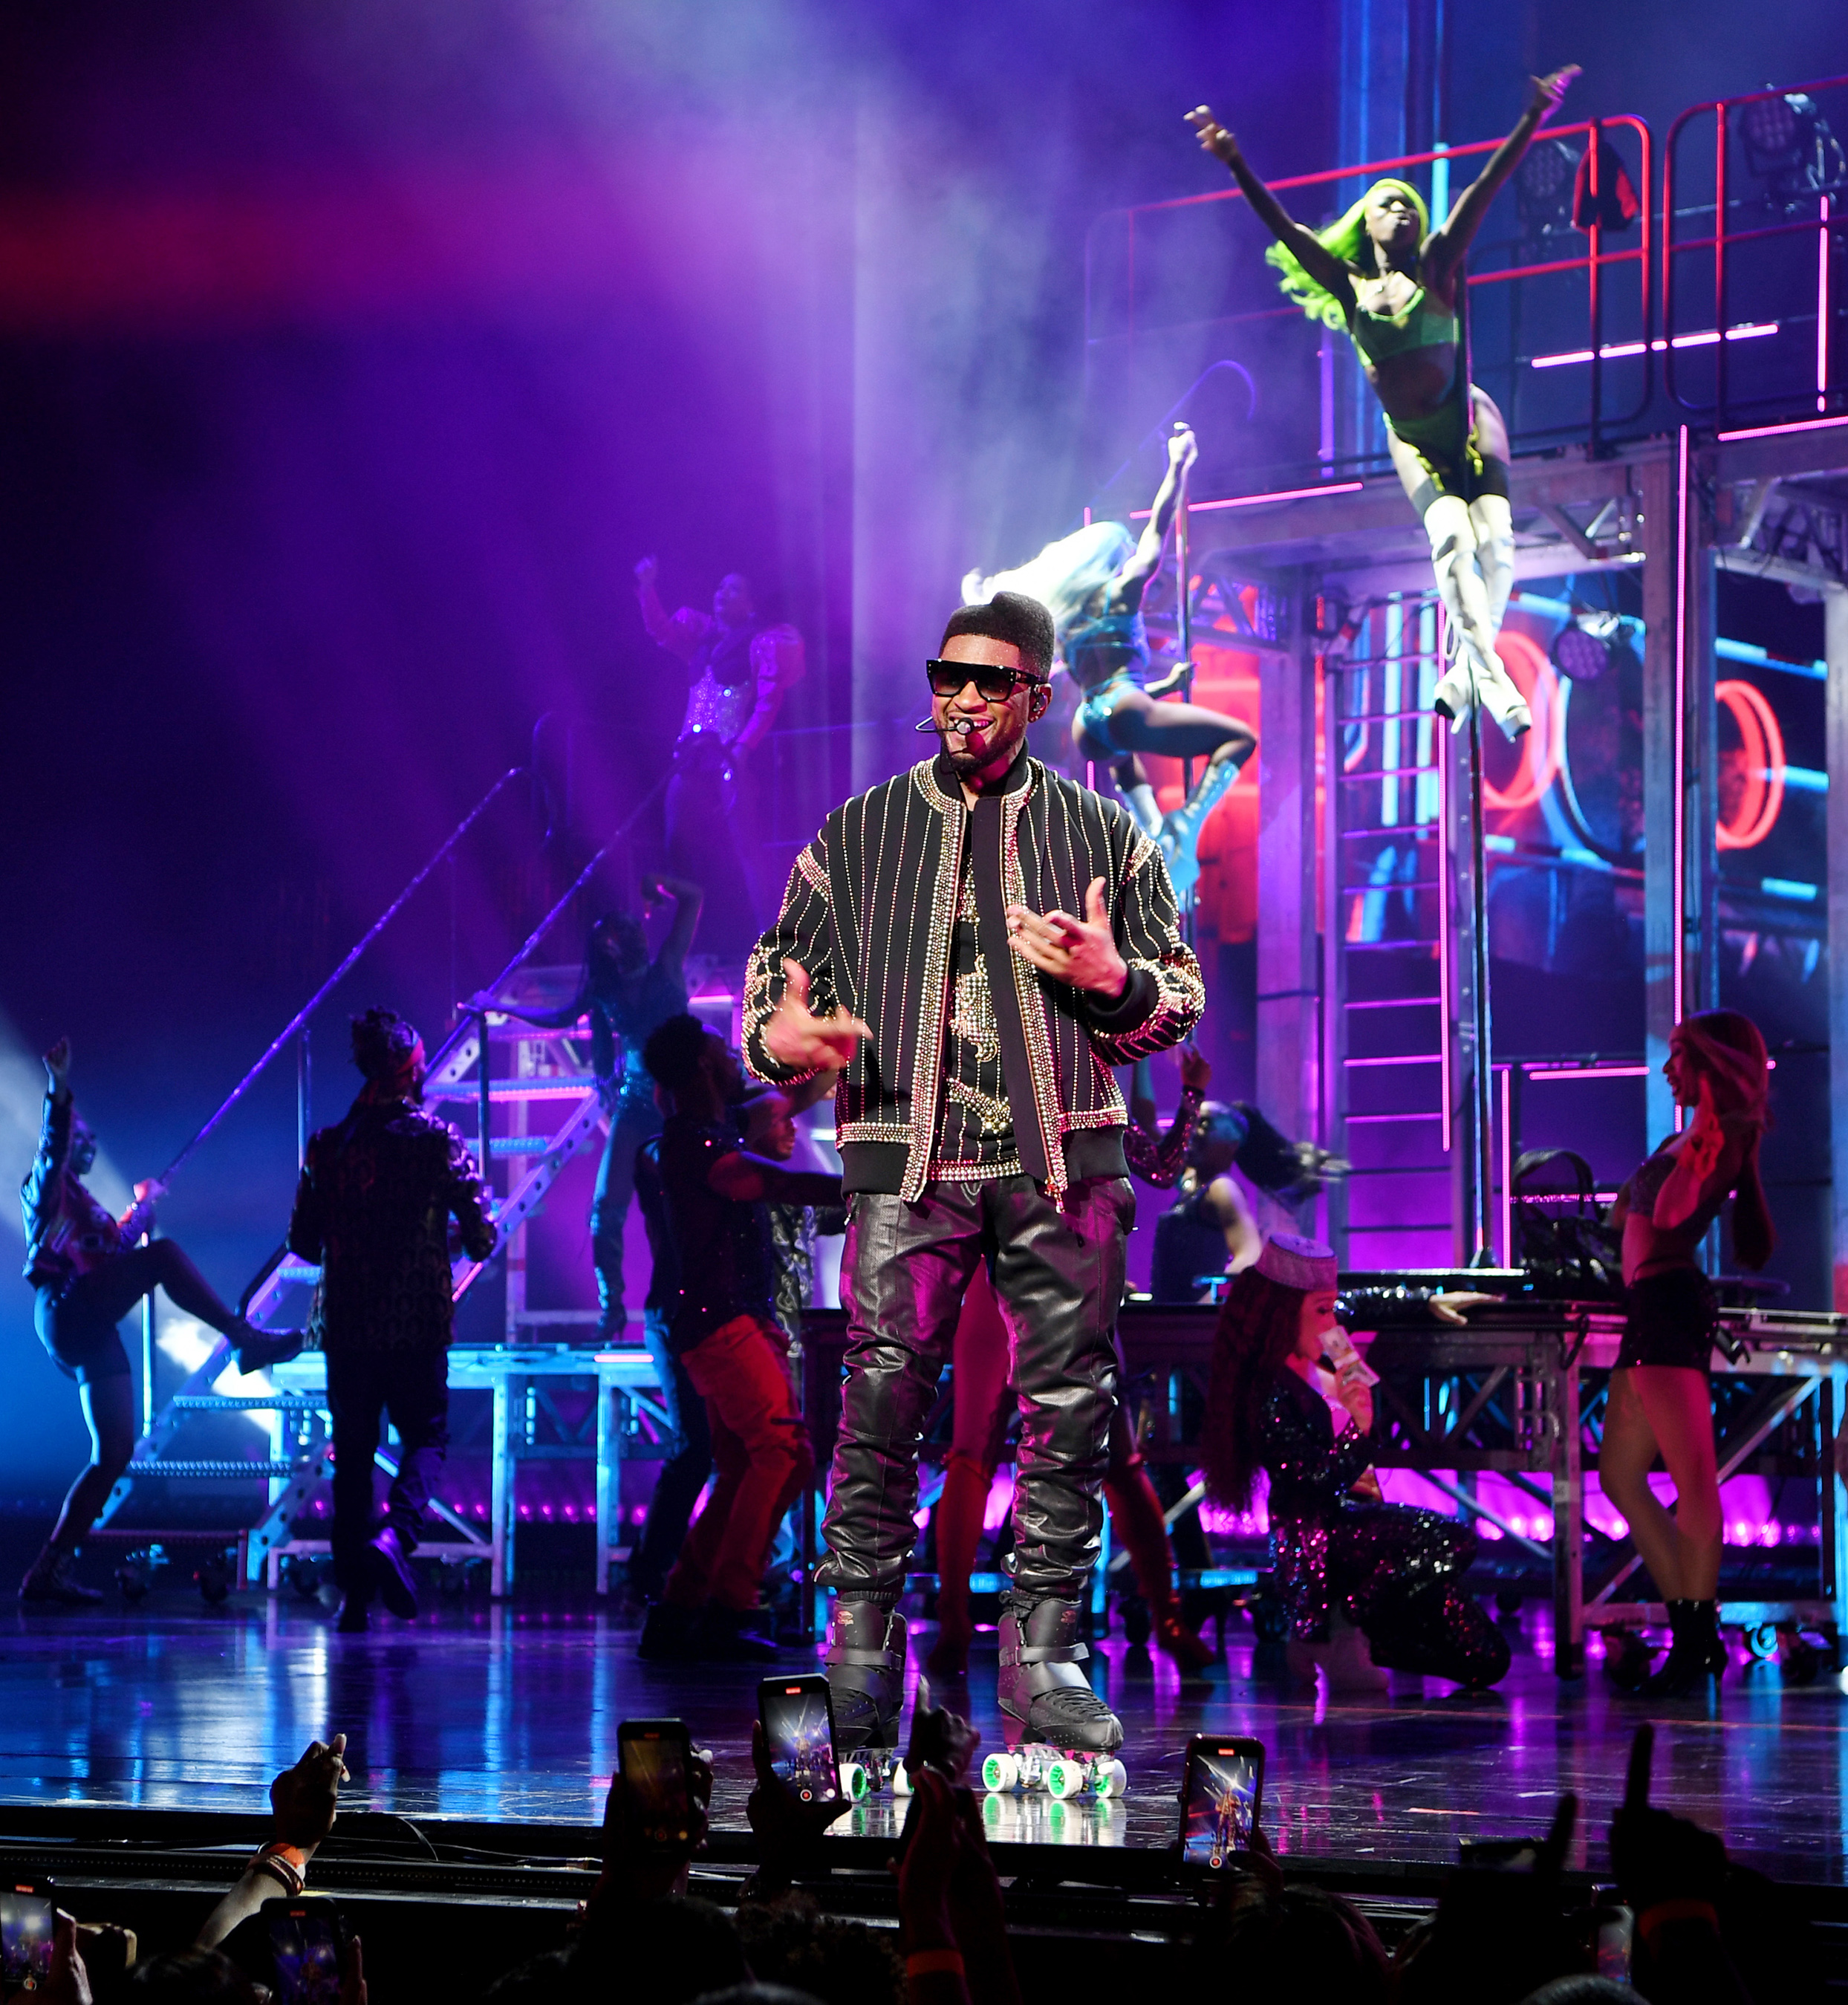 Usher opens Las Vegas residency at The Colosseum at Caesars Palace. Credit: Denise Truscello